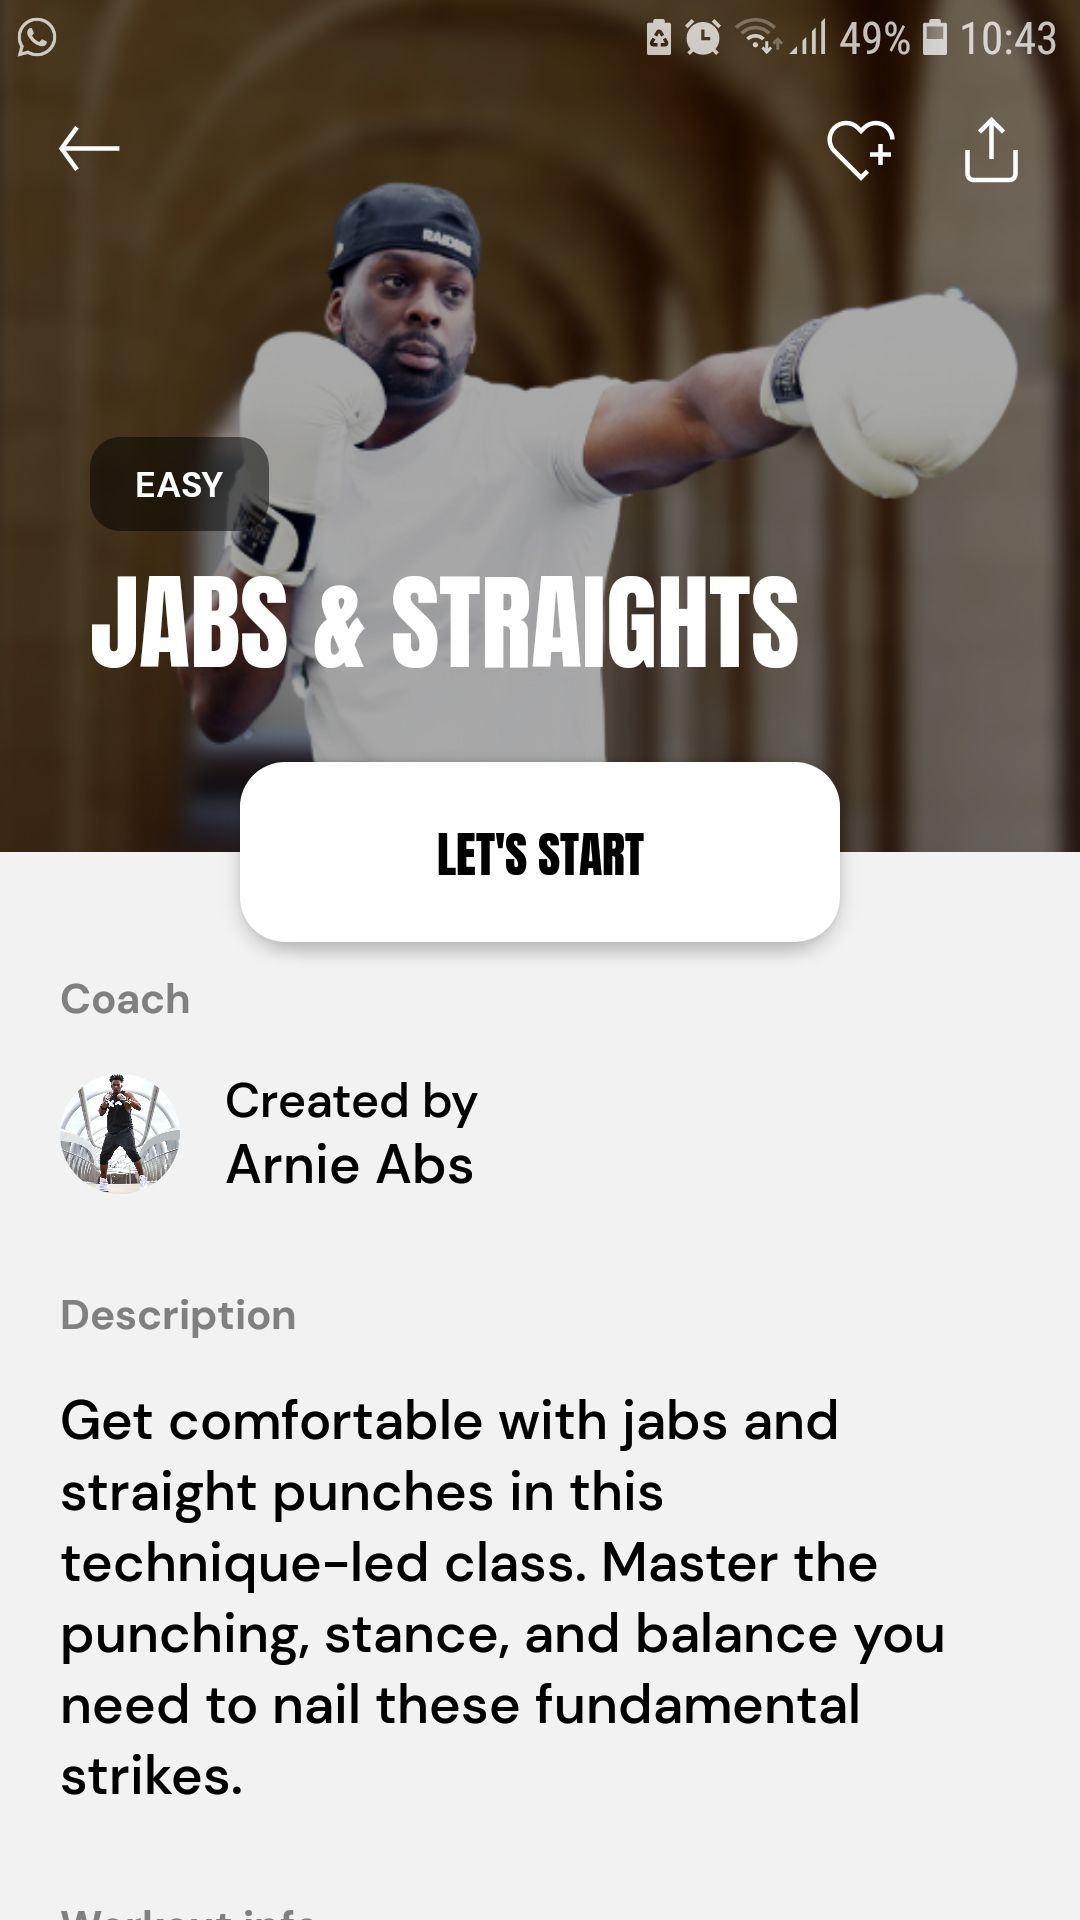 PunchLab mobile boxing app jabs straights